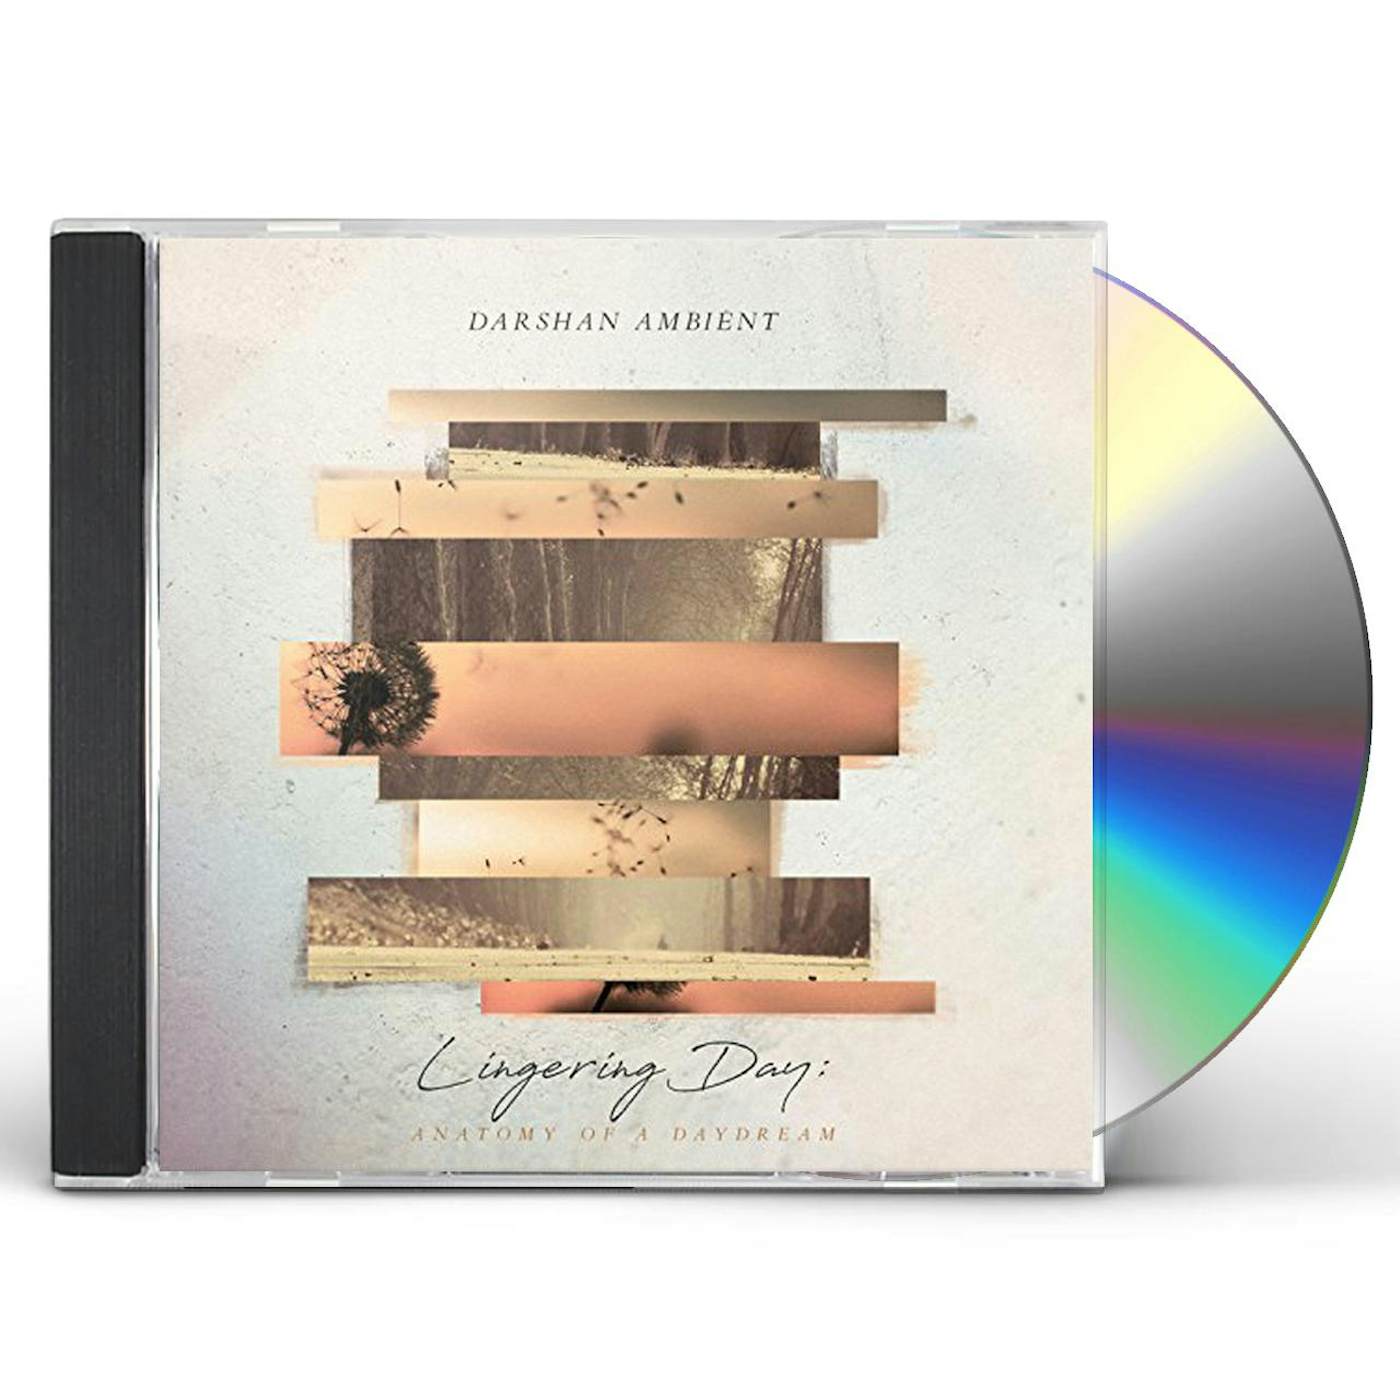 Darshan Ambient LINGERING DAY: ANATOMY OF A DAYDREAM CD